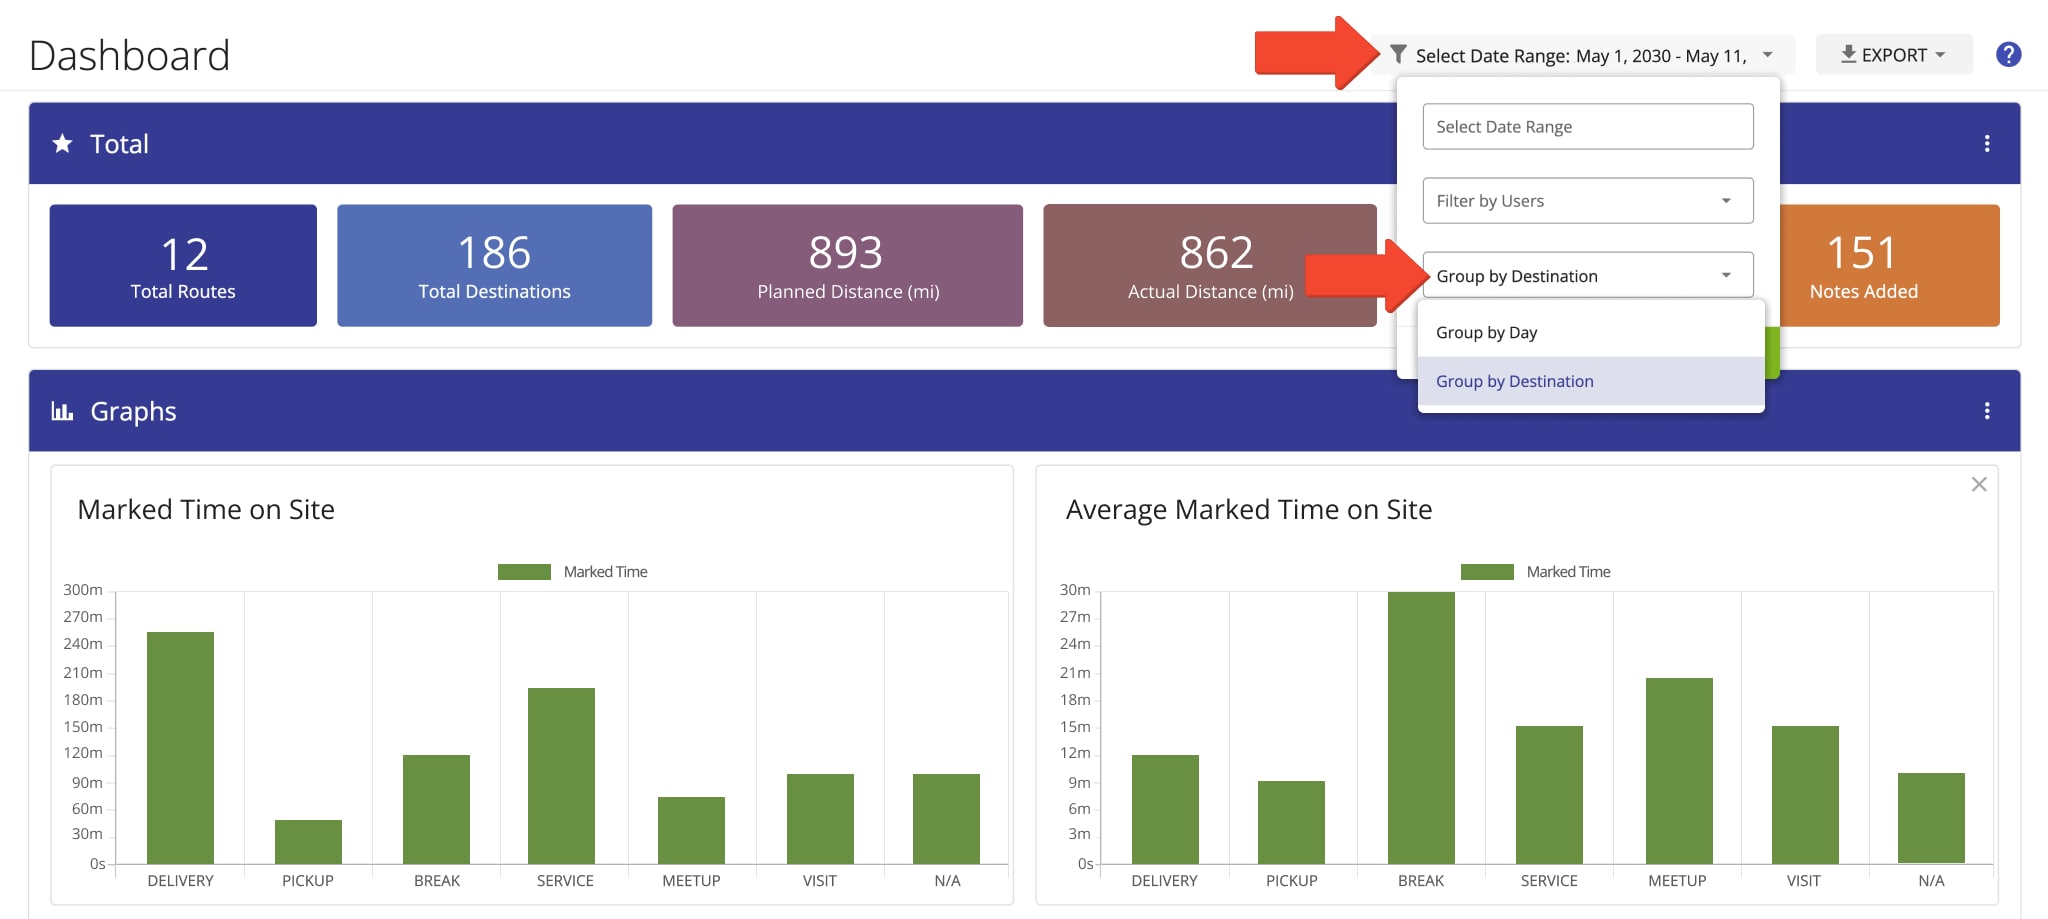 The Average Marked Time on Site graph displays the average time on site of destinations as marked by assigned users.